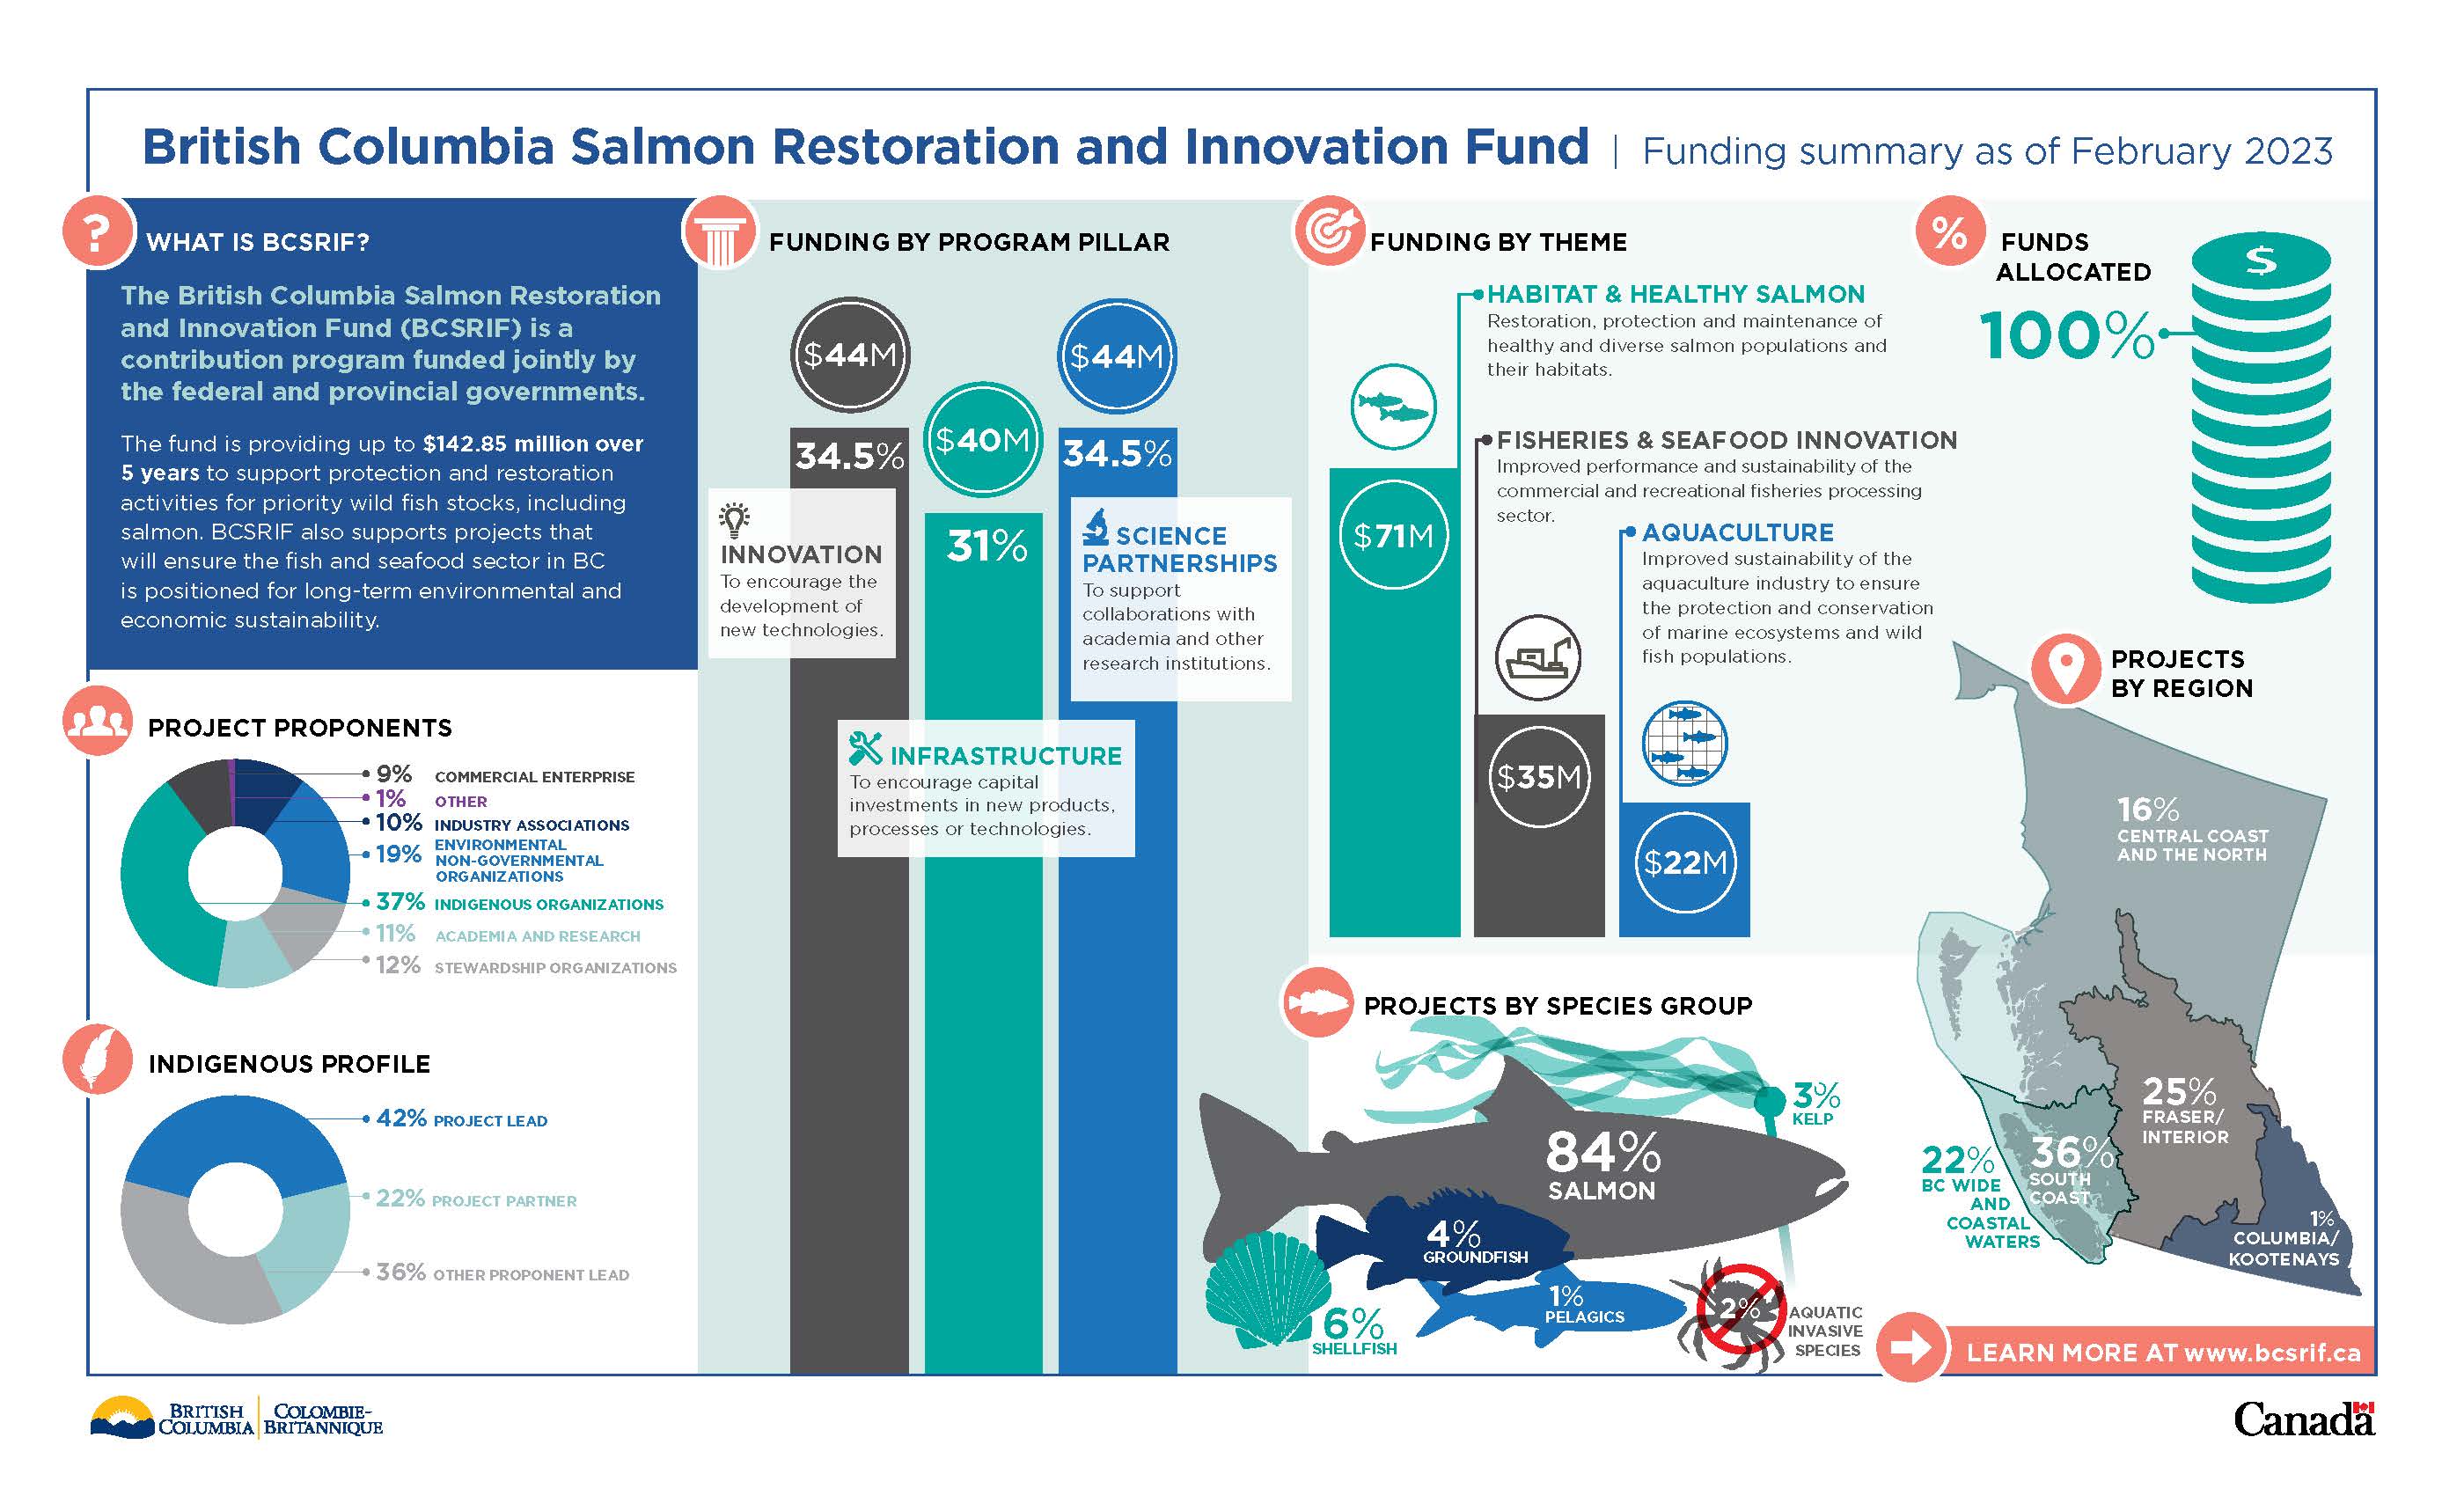 Infographic: Summary of British Columbia Salmon Restoration and Innovation Fund funding as of February 2023